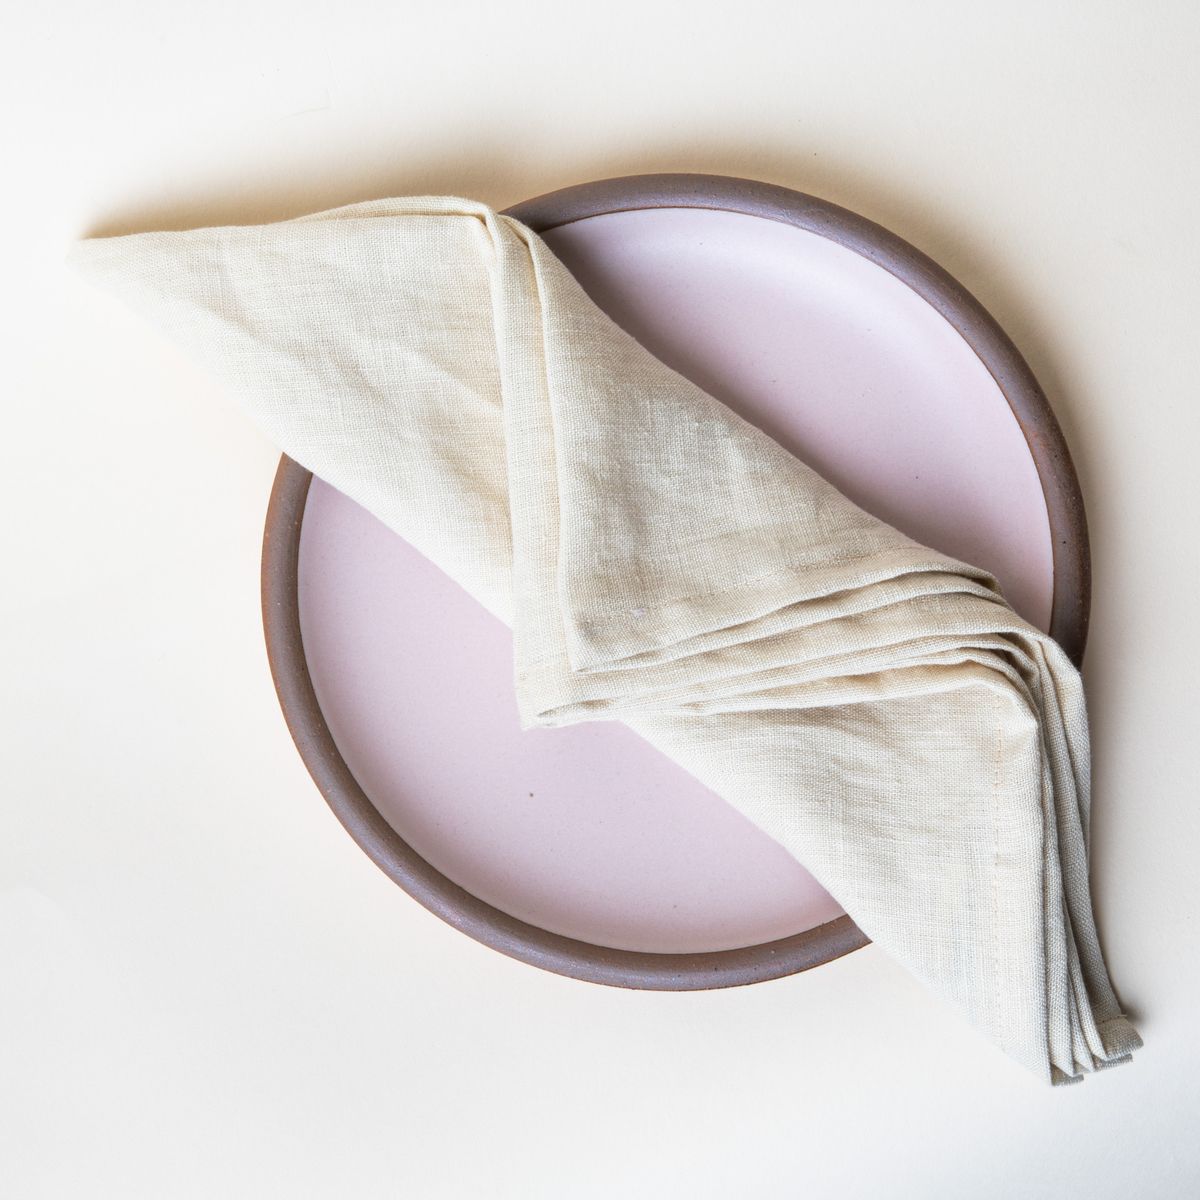 Folded linen napkin in a soft butter yellow on a soft light pink plate